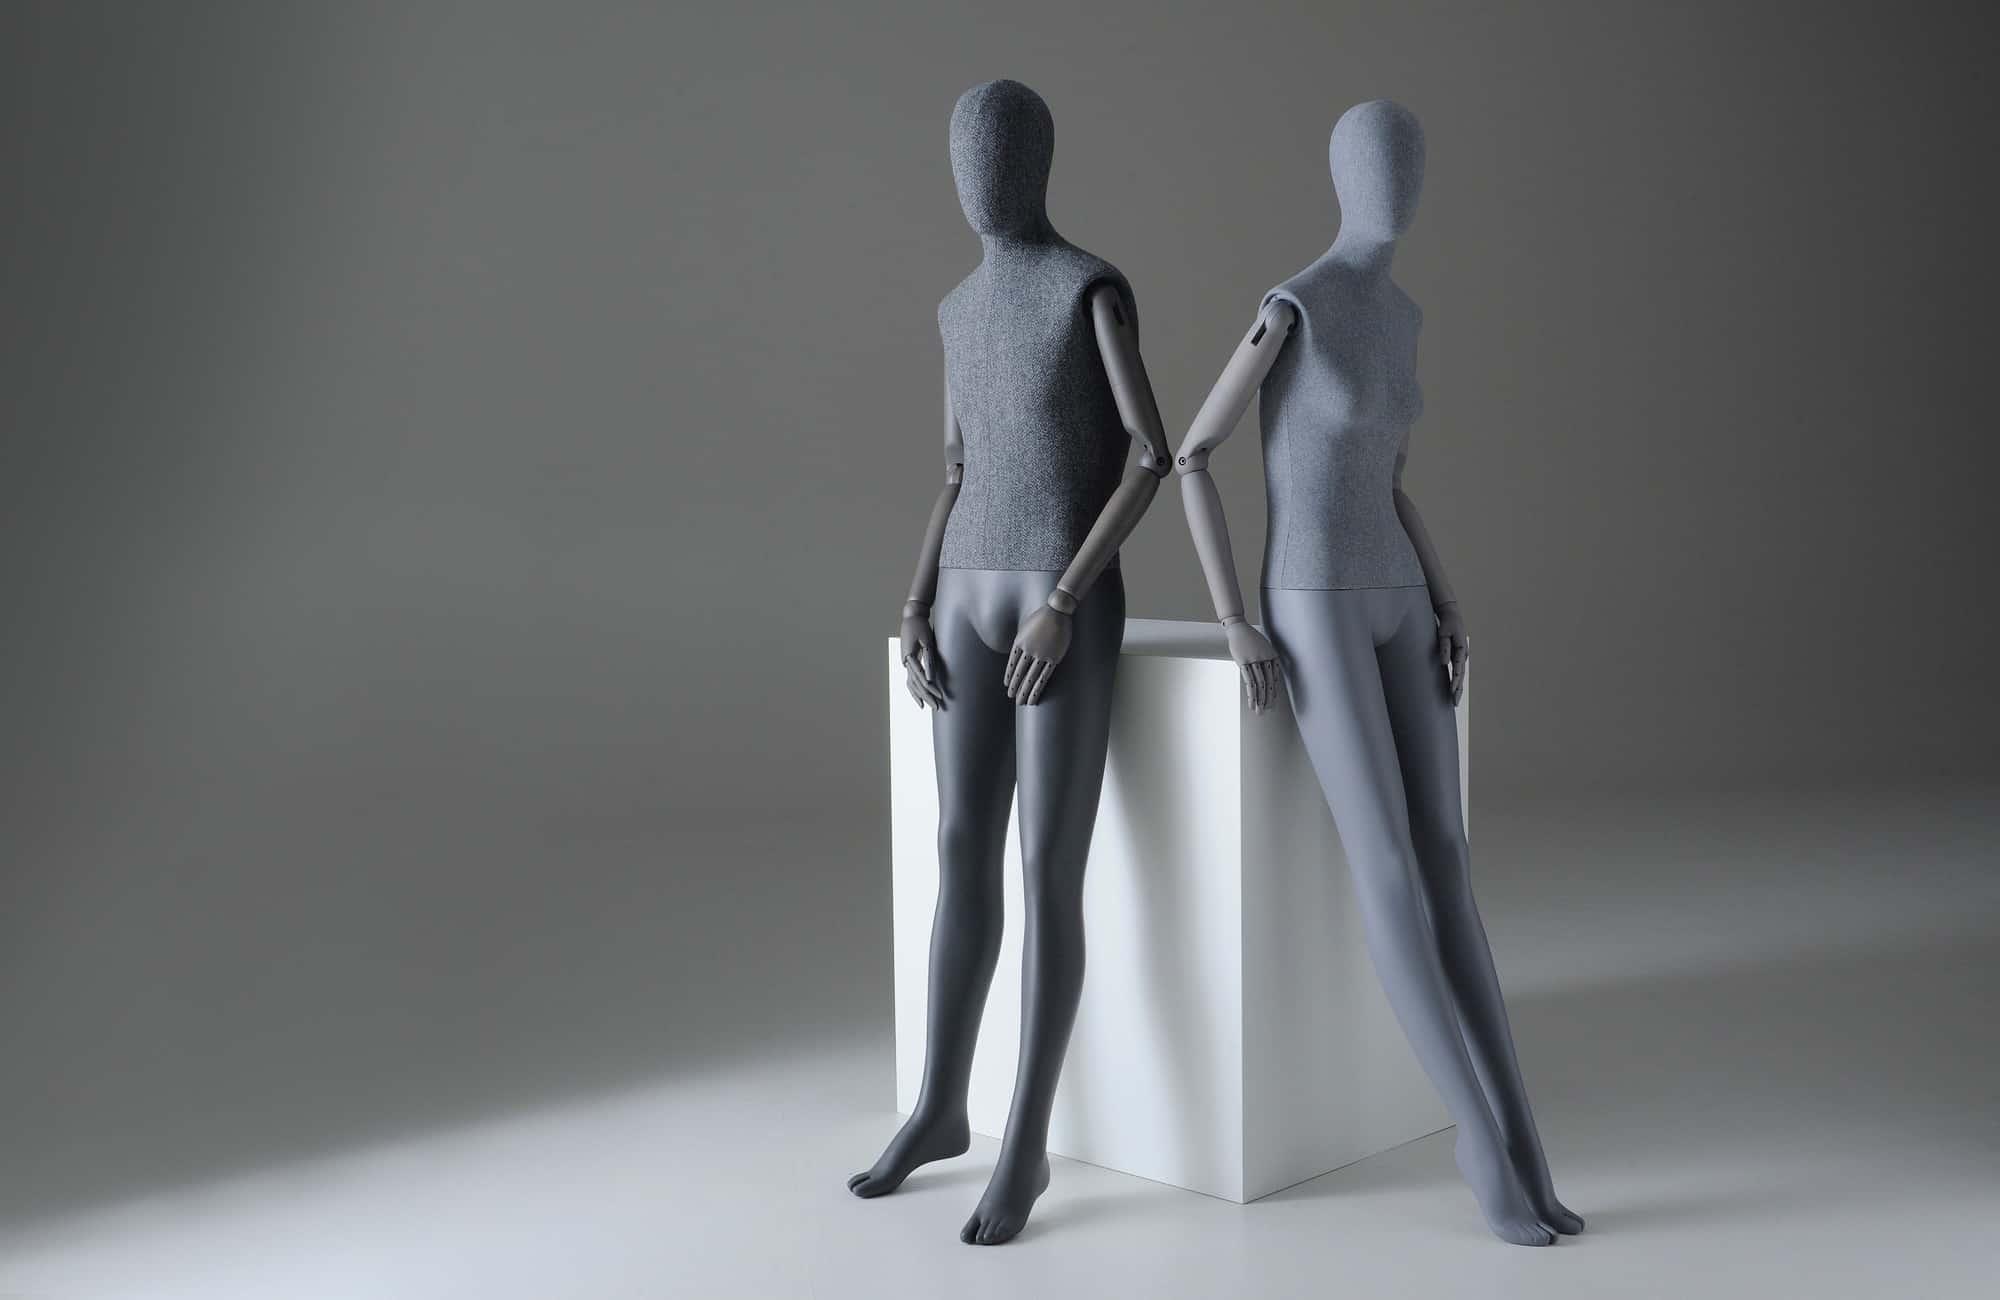 Male and female Sartorial mannequins leaning against a plinth